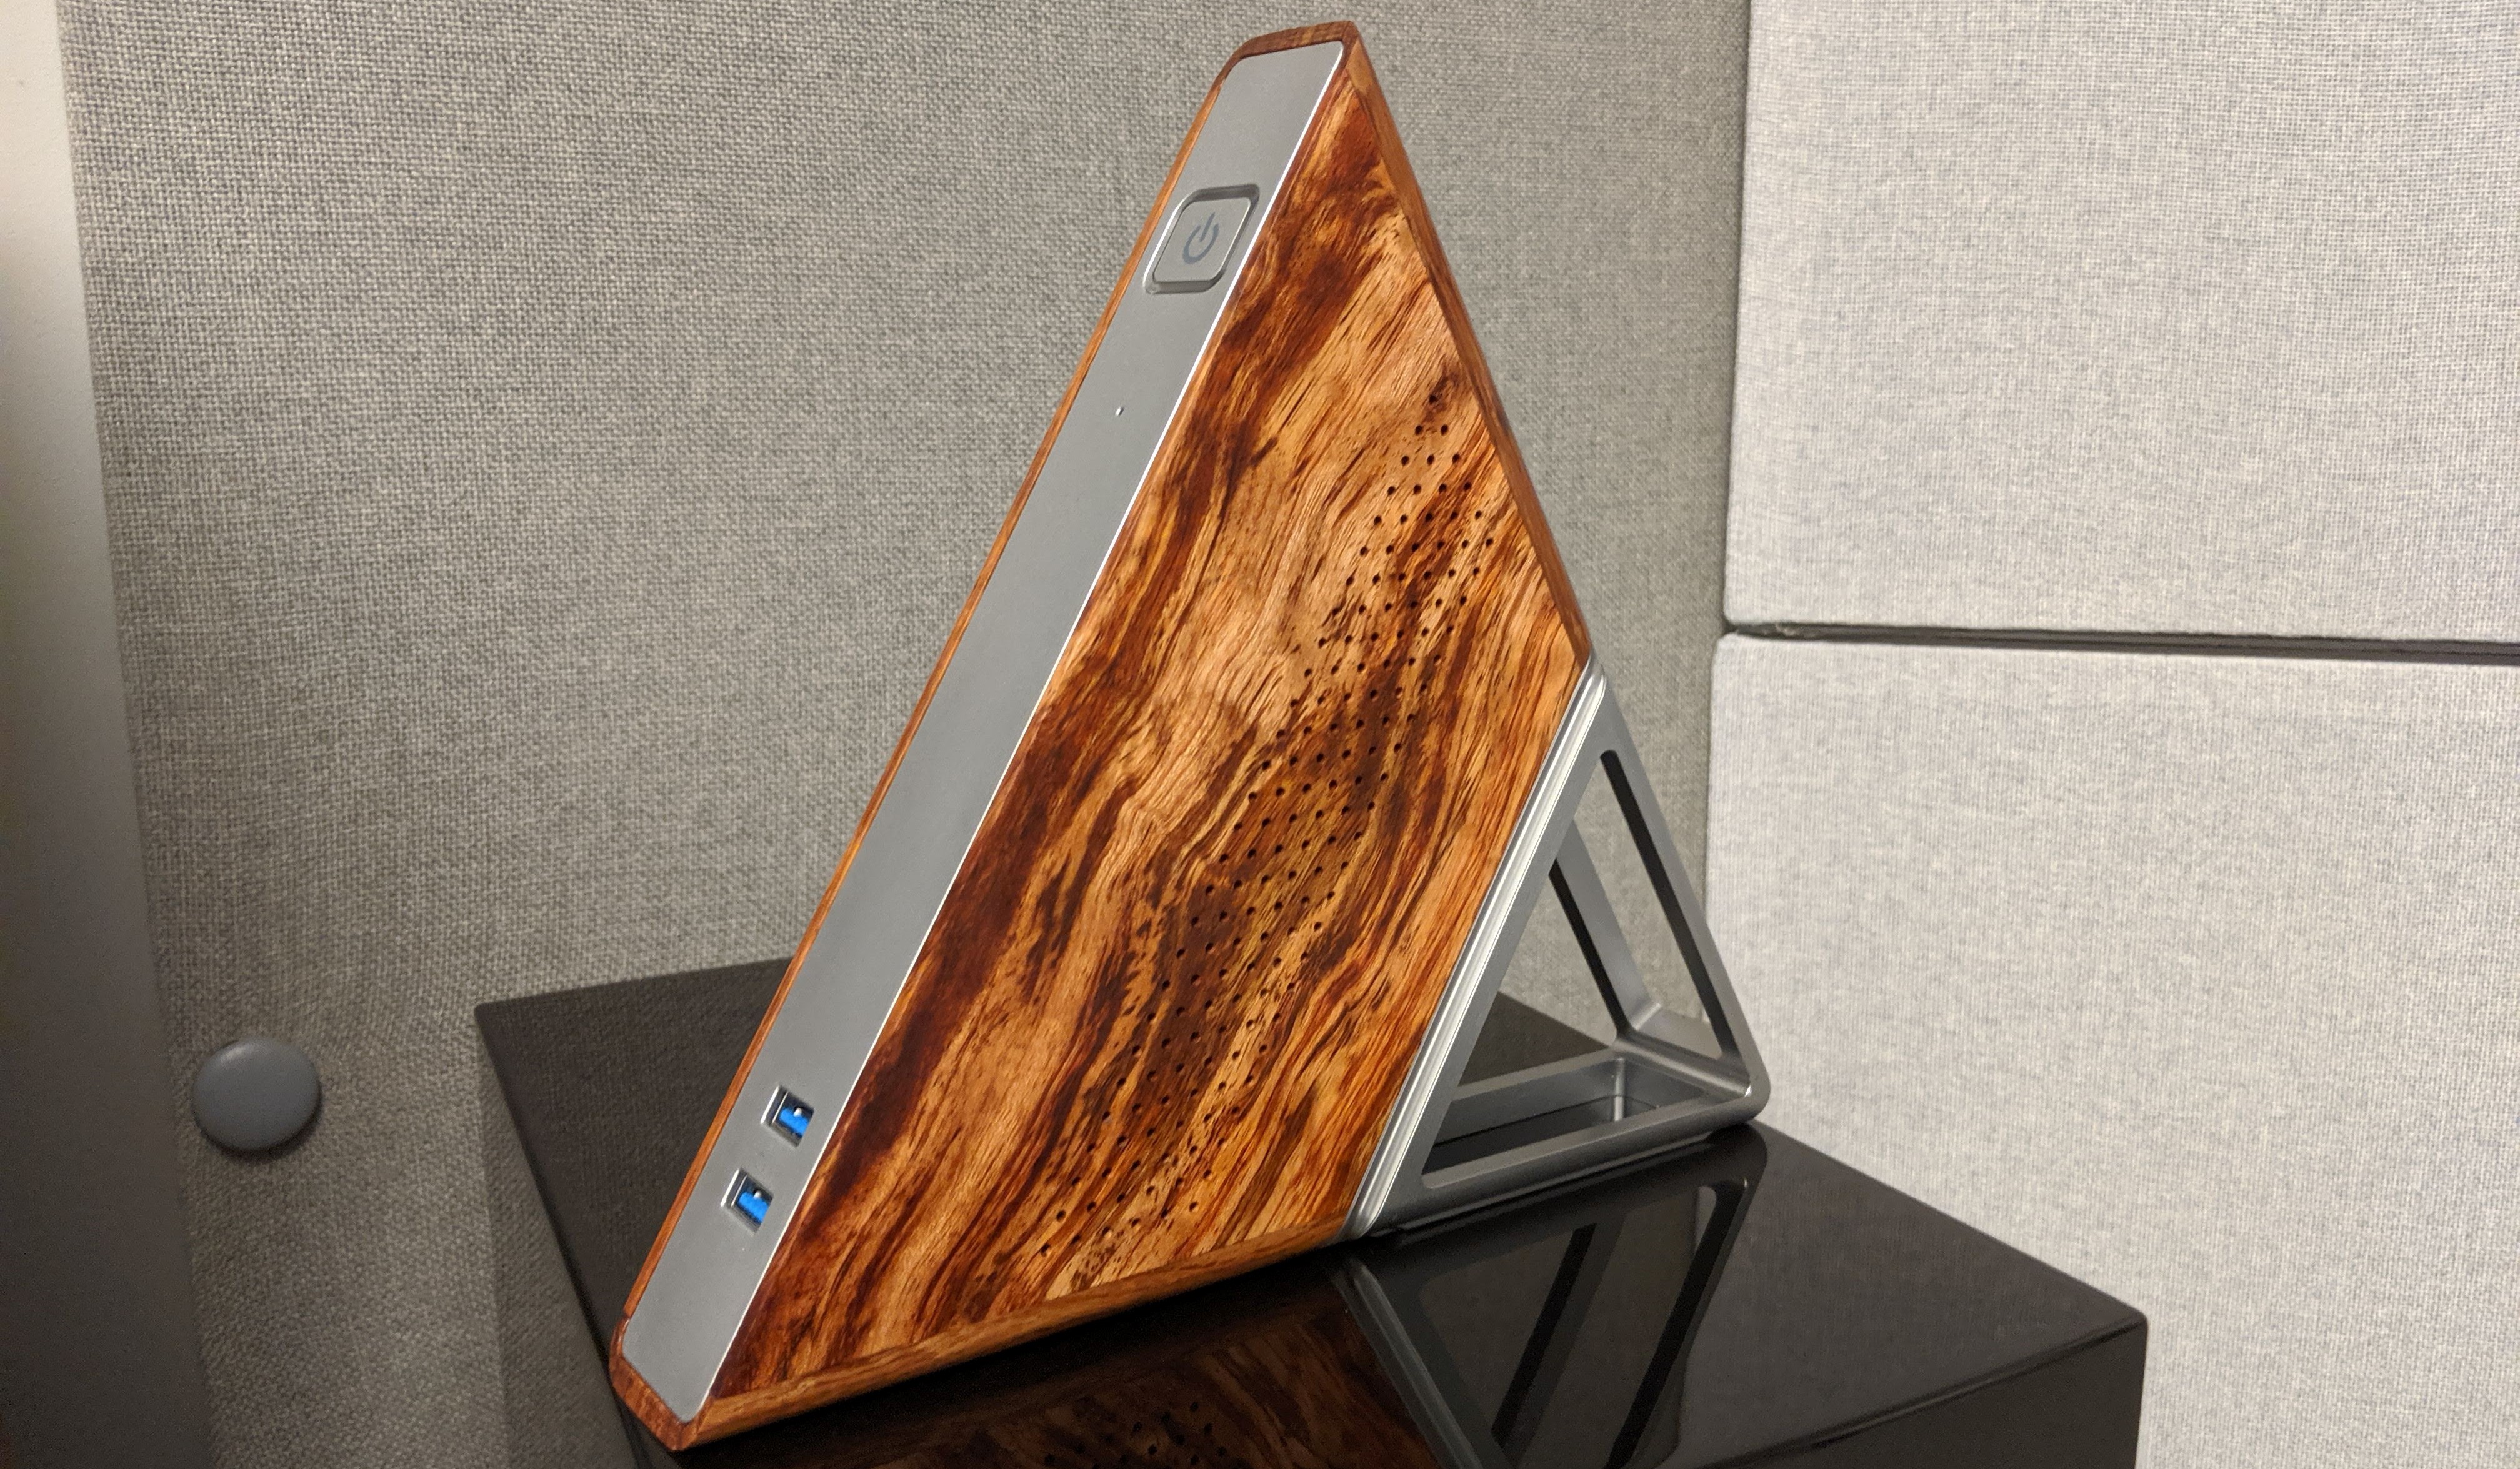 This Absurdly Wooden Pc Comes, Wooden Desktop Pc Case